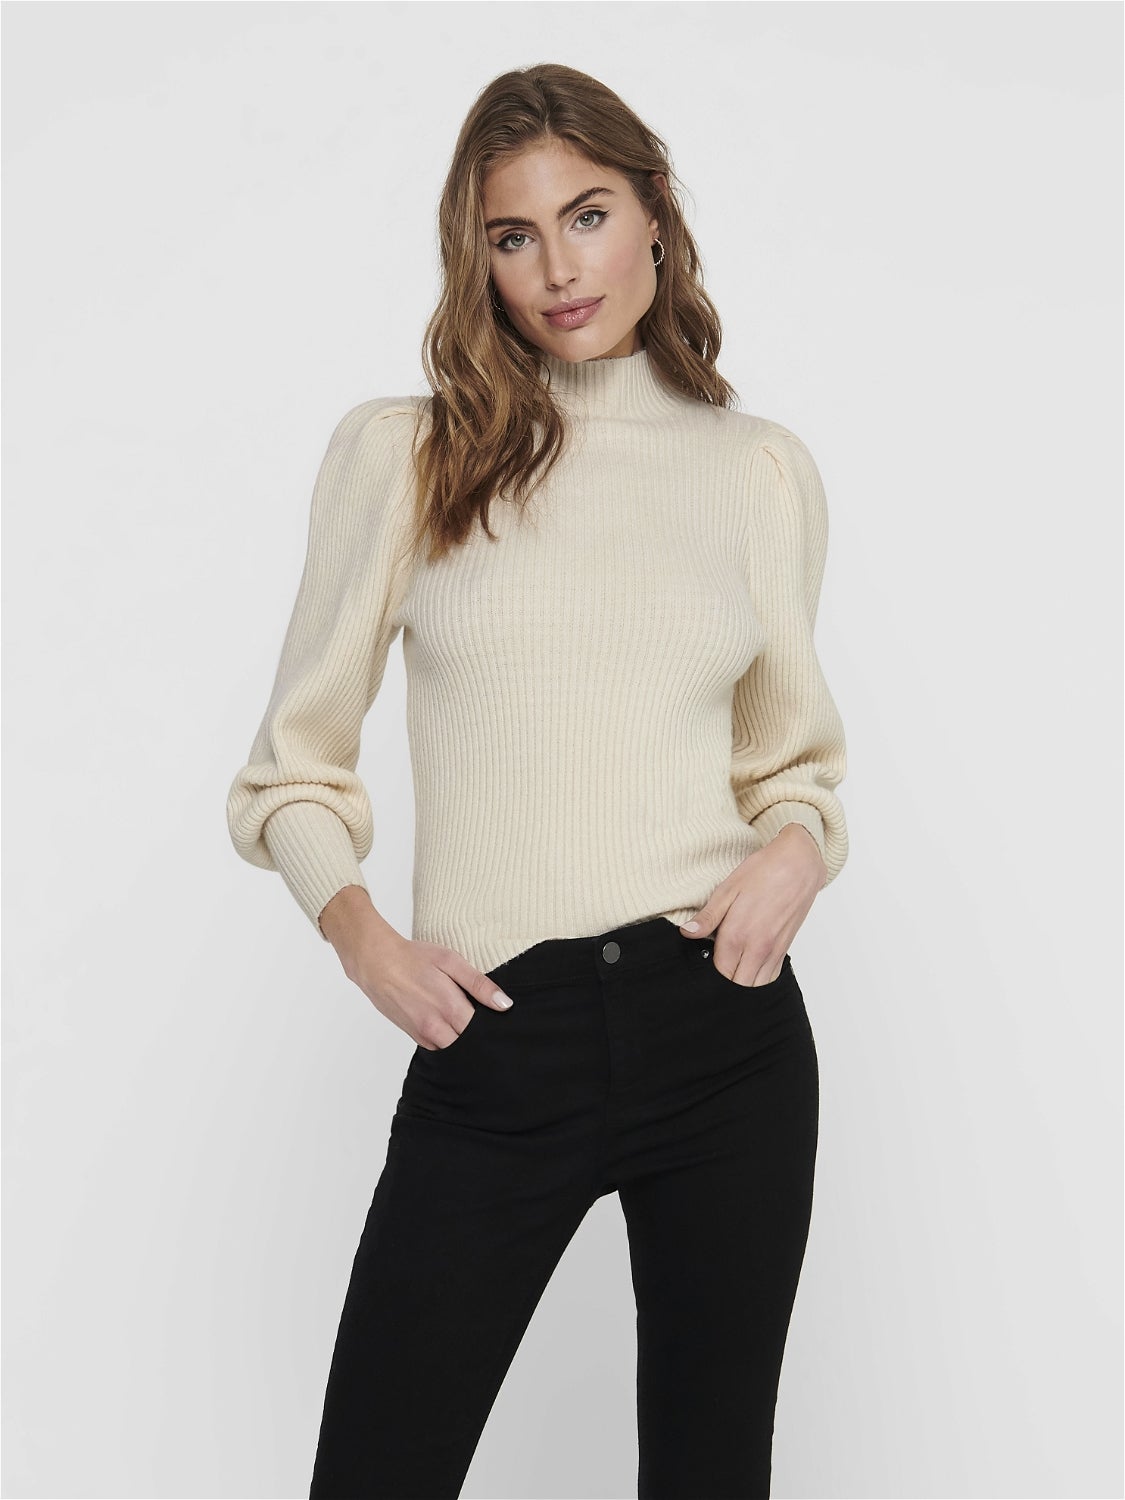 Mand terrasse kasket High neck Knitted Pullover with 25% discount! | ONLY®